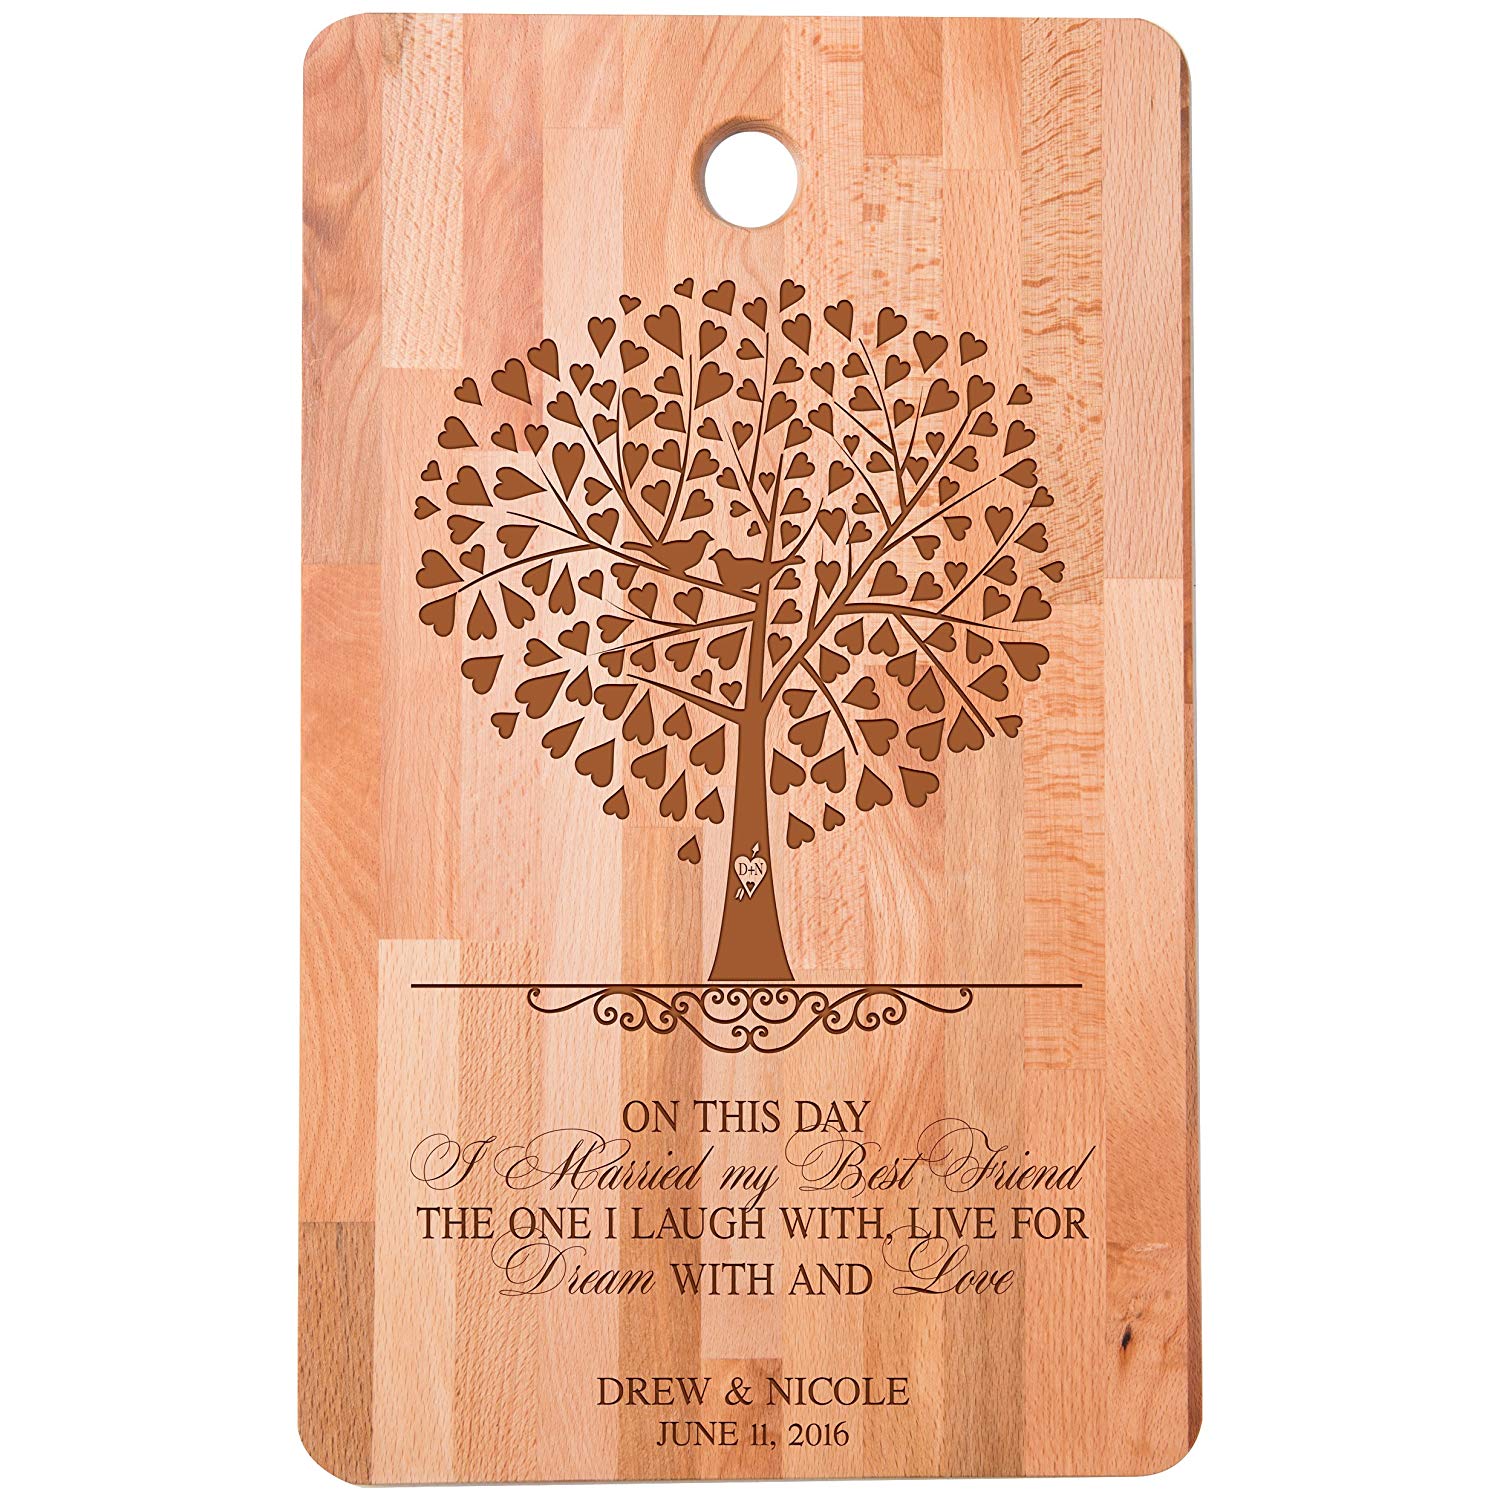 Personalized bamboo Wedding Cutting Board Gift - On This Day - LifeSong Milestones